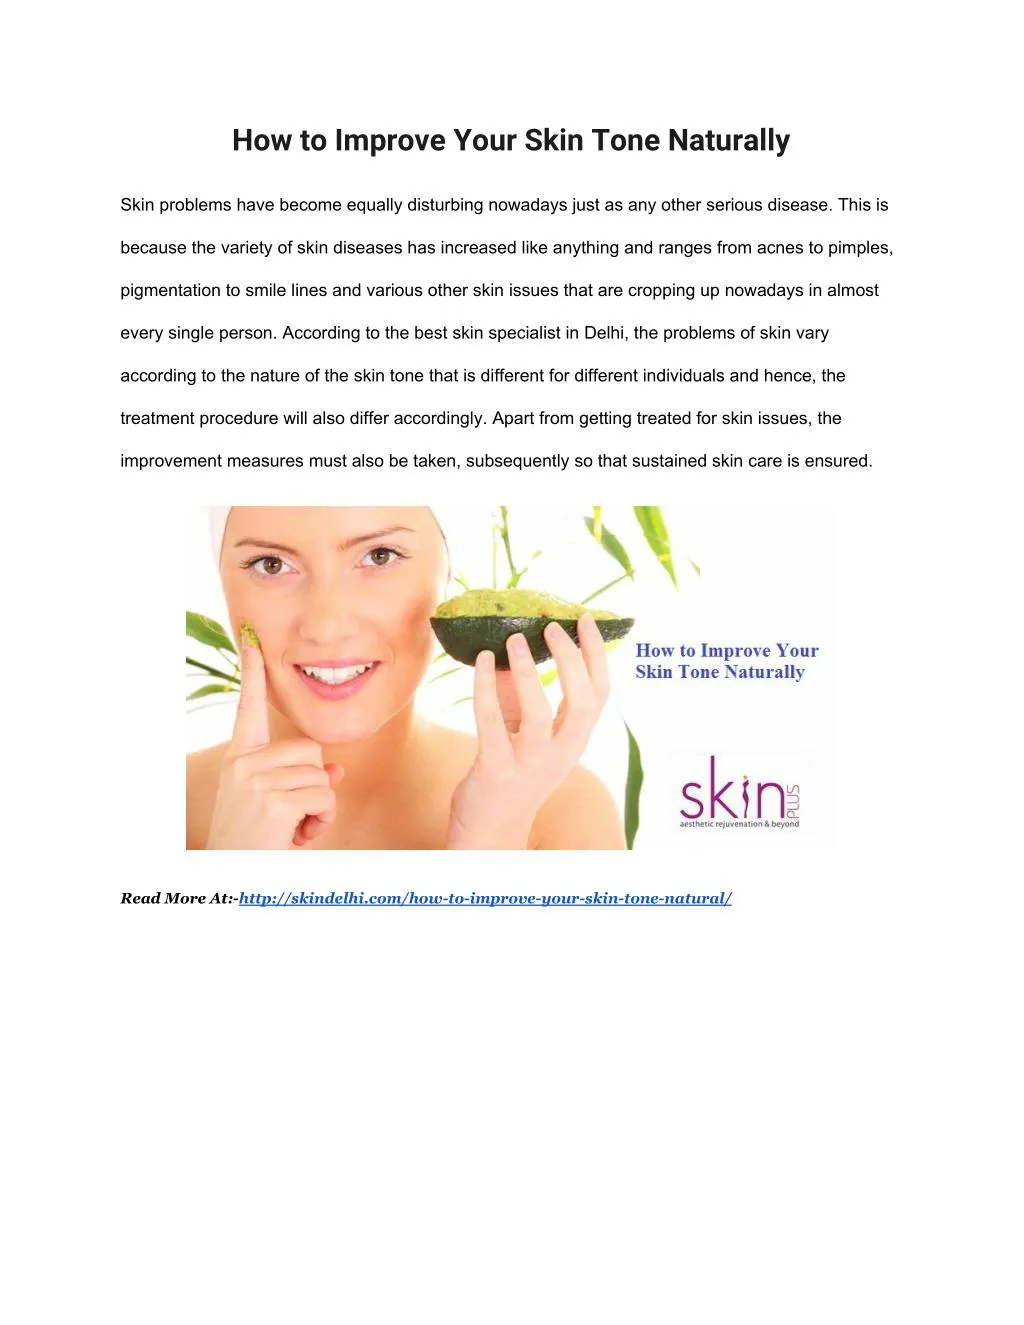 PPT How to Improve Your Skin Tone Naturally PowerPoint